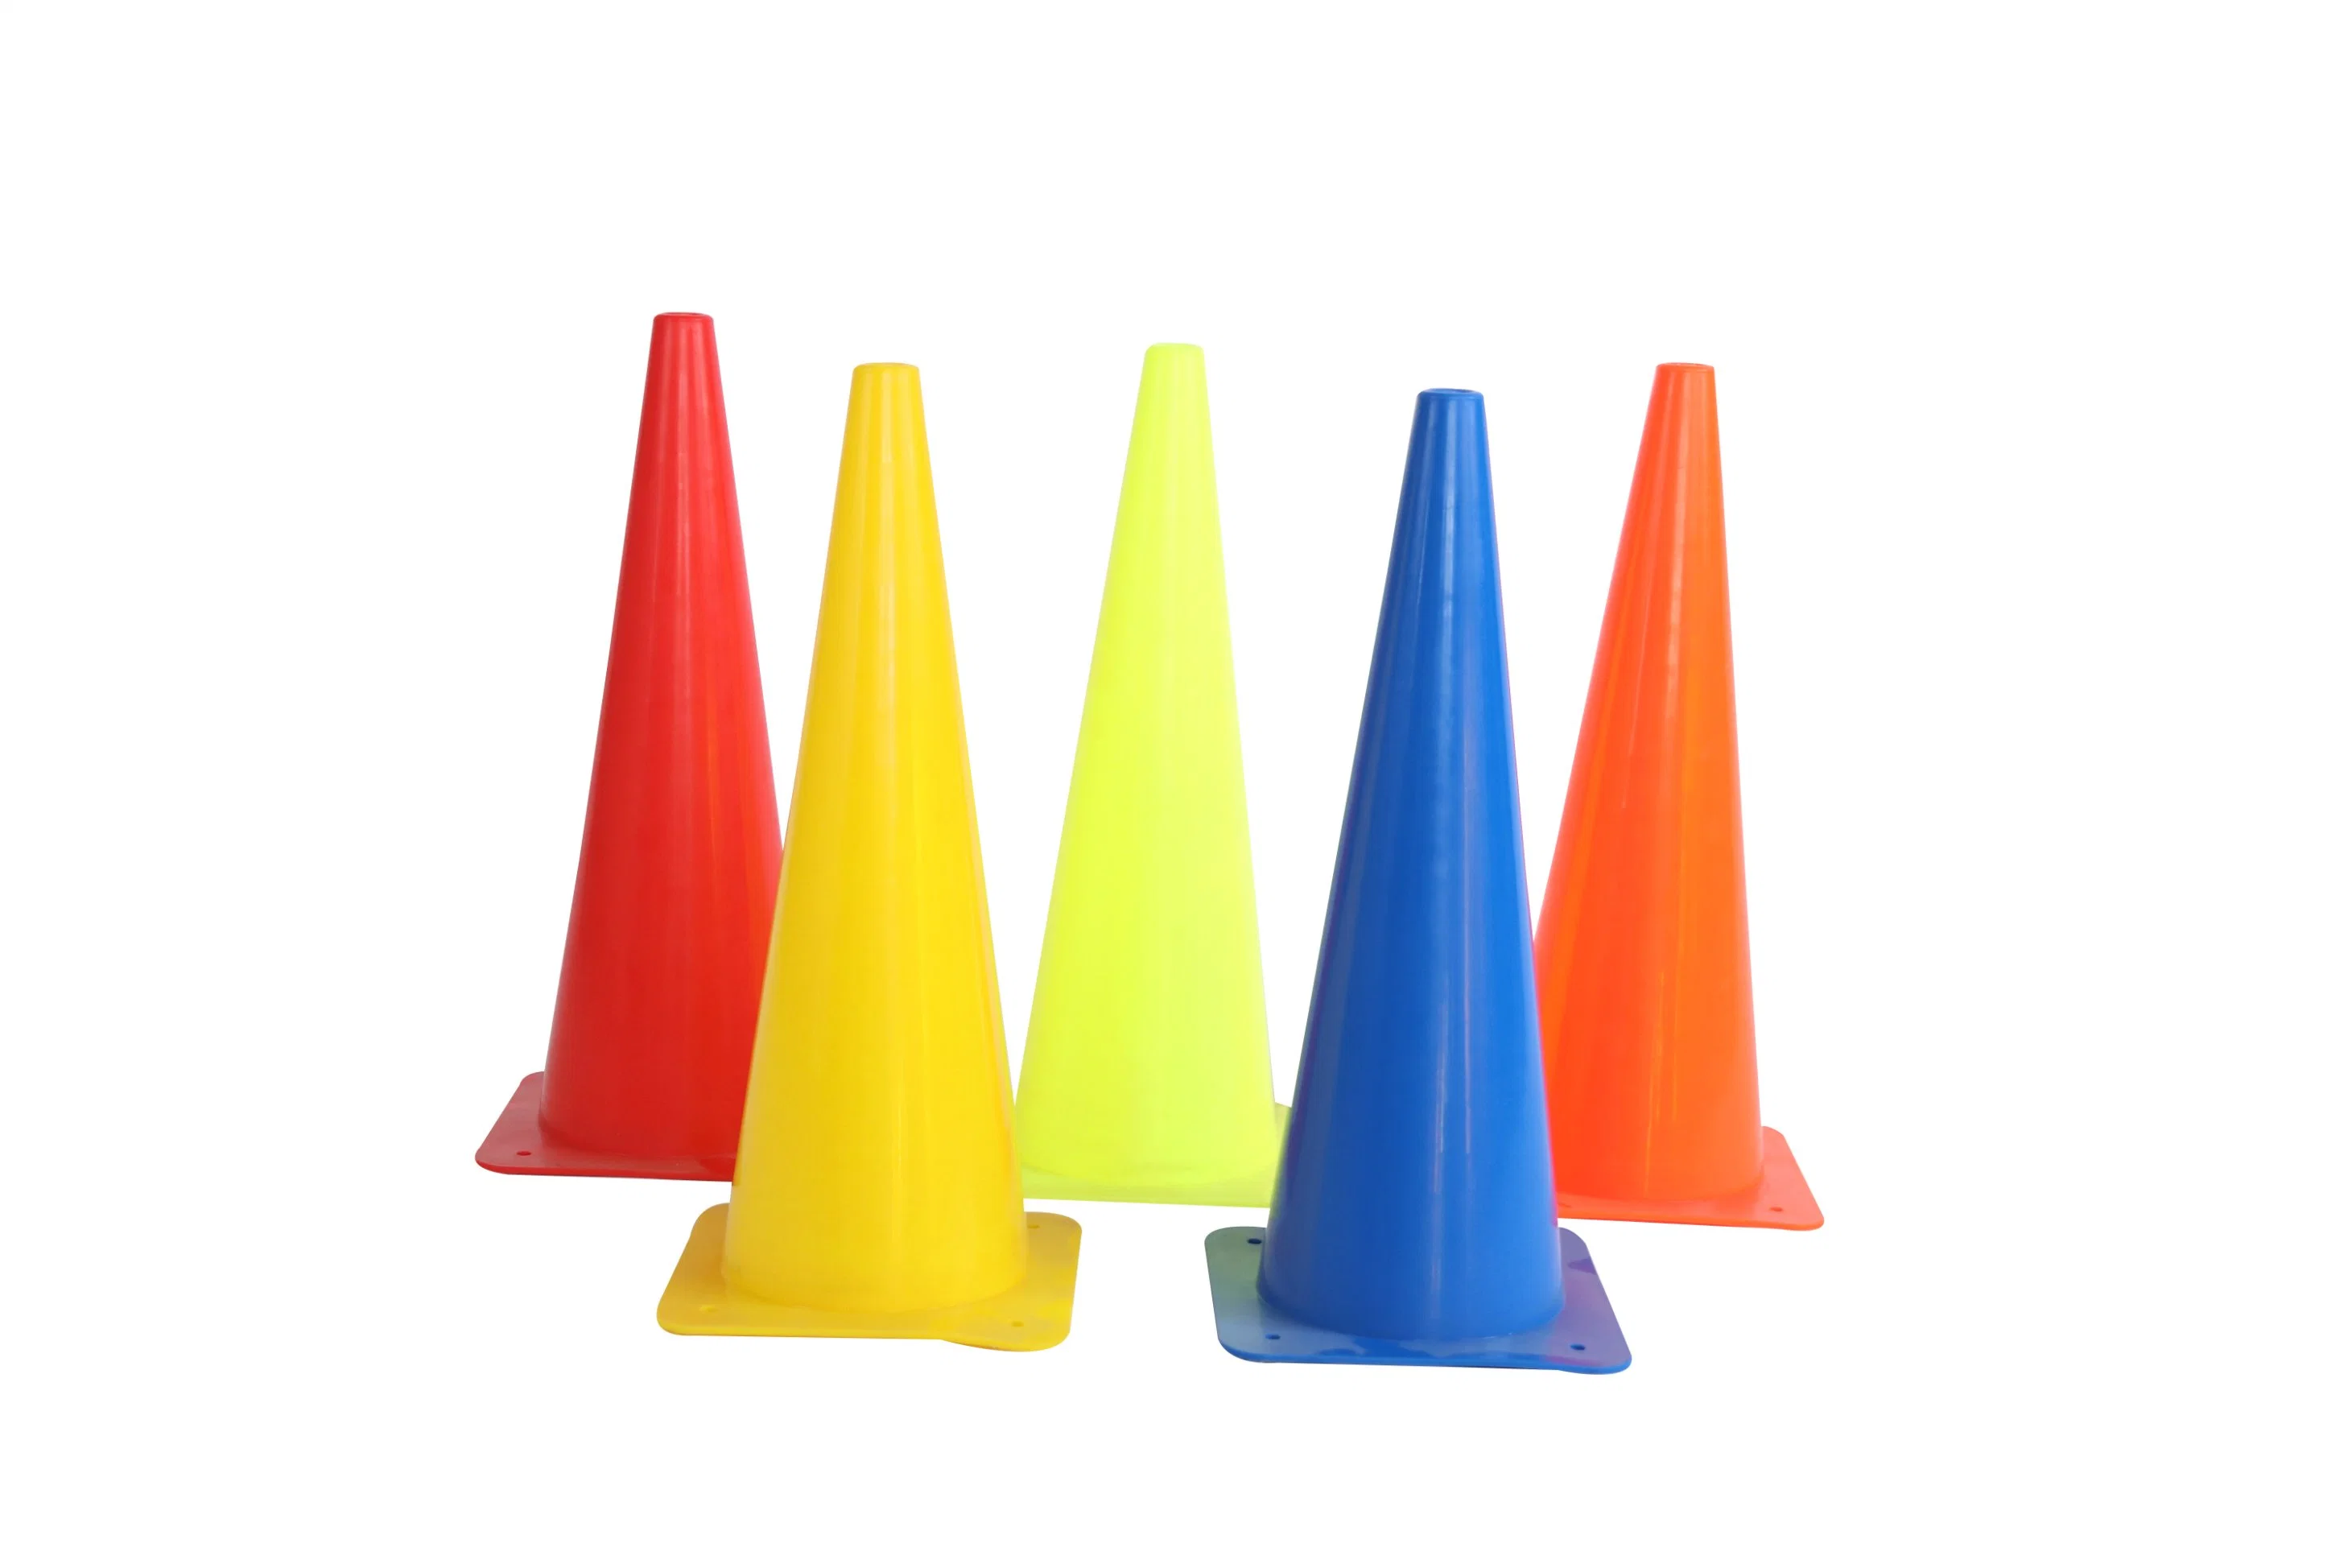 Wholesale/Supplier Traffic Training Cones, Plastic Safety Parking Cones, Agility Field Marker Cones for Soccer Basketball Football Drills Training Agility Cones